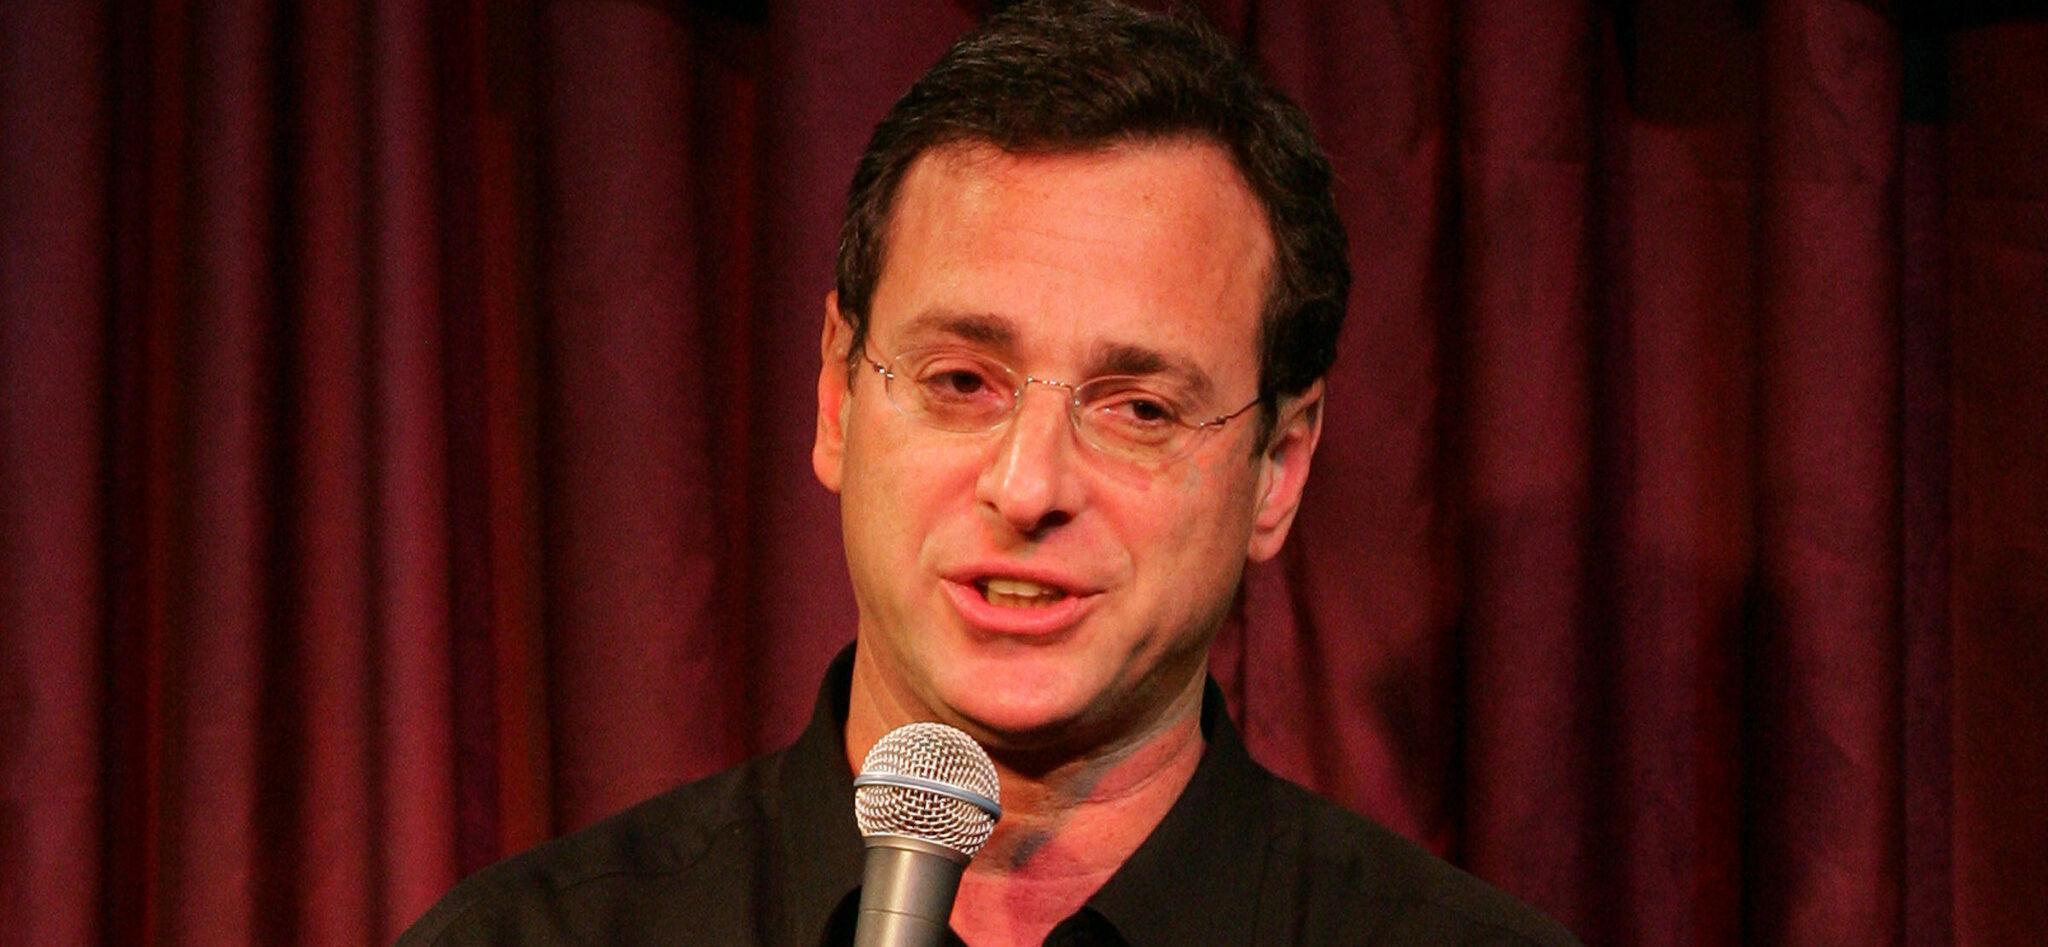 Comedian Bob Saget performs at the Improv Comedy Club at the Seminole Hard Rock Hotel and Casino